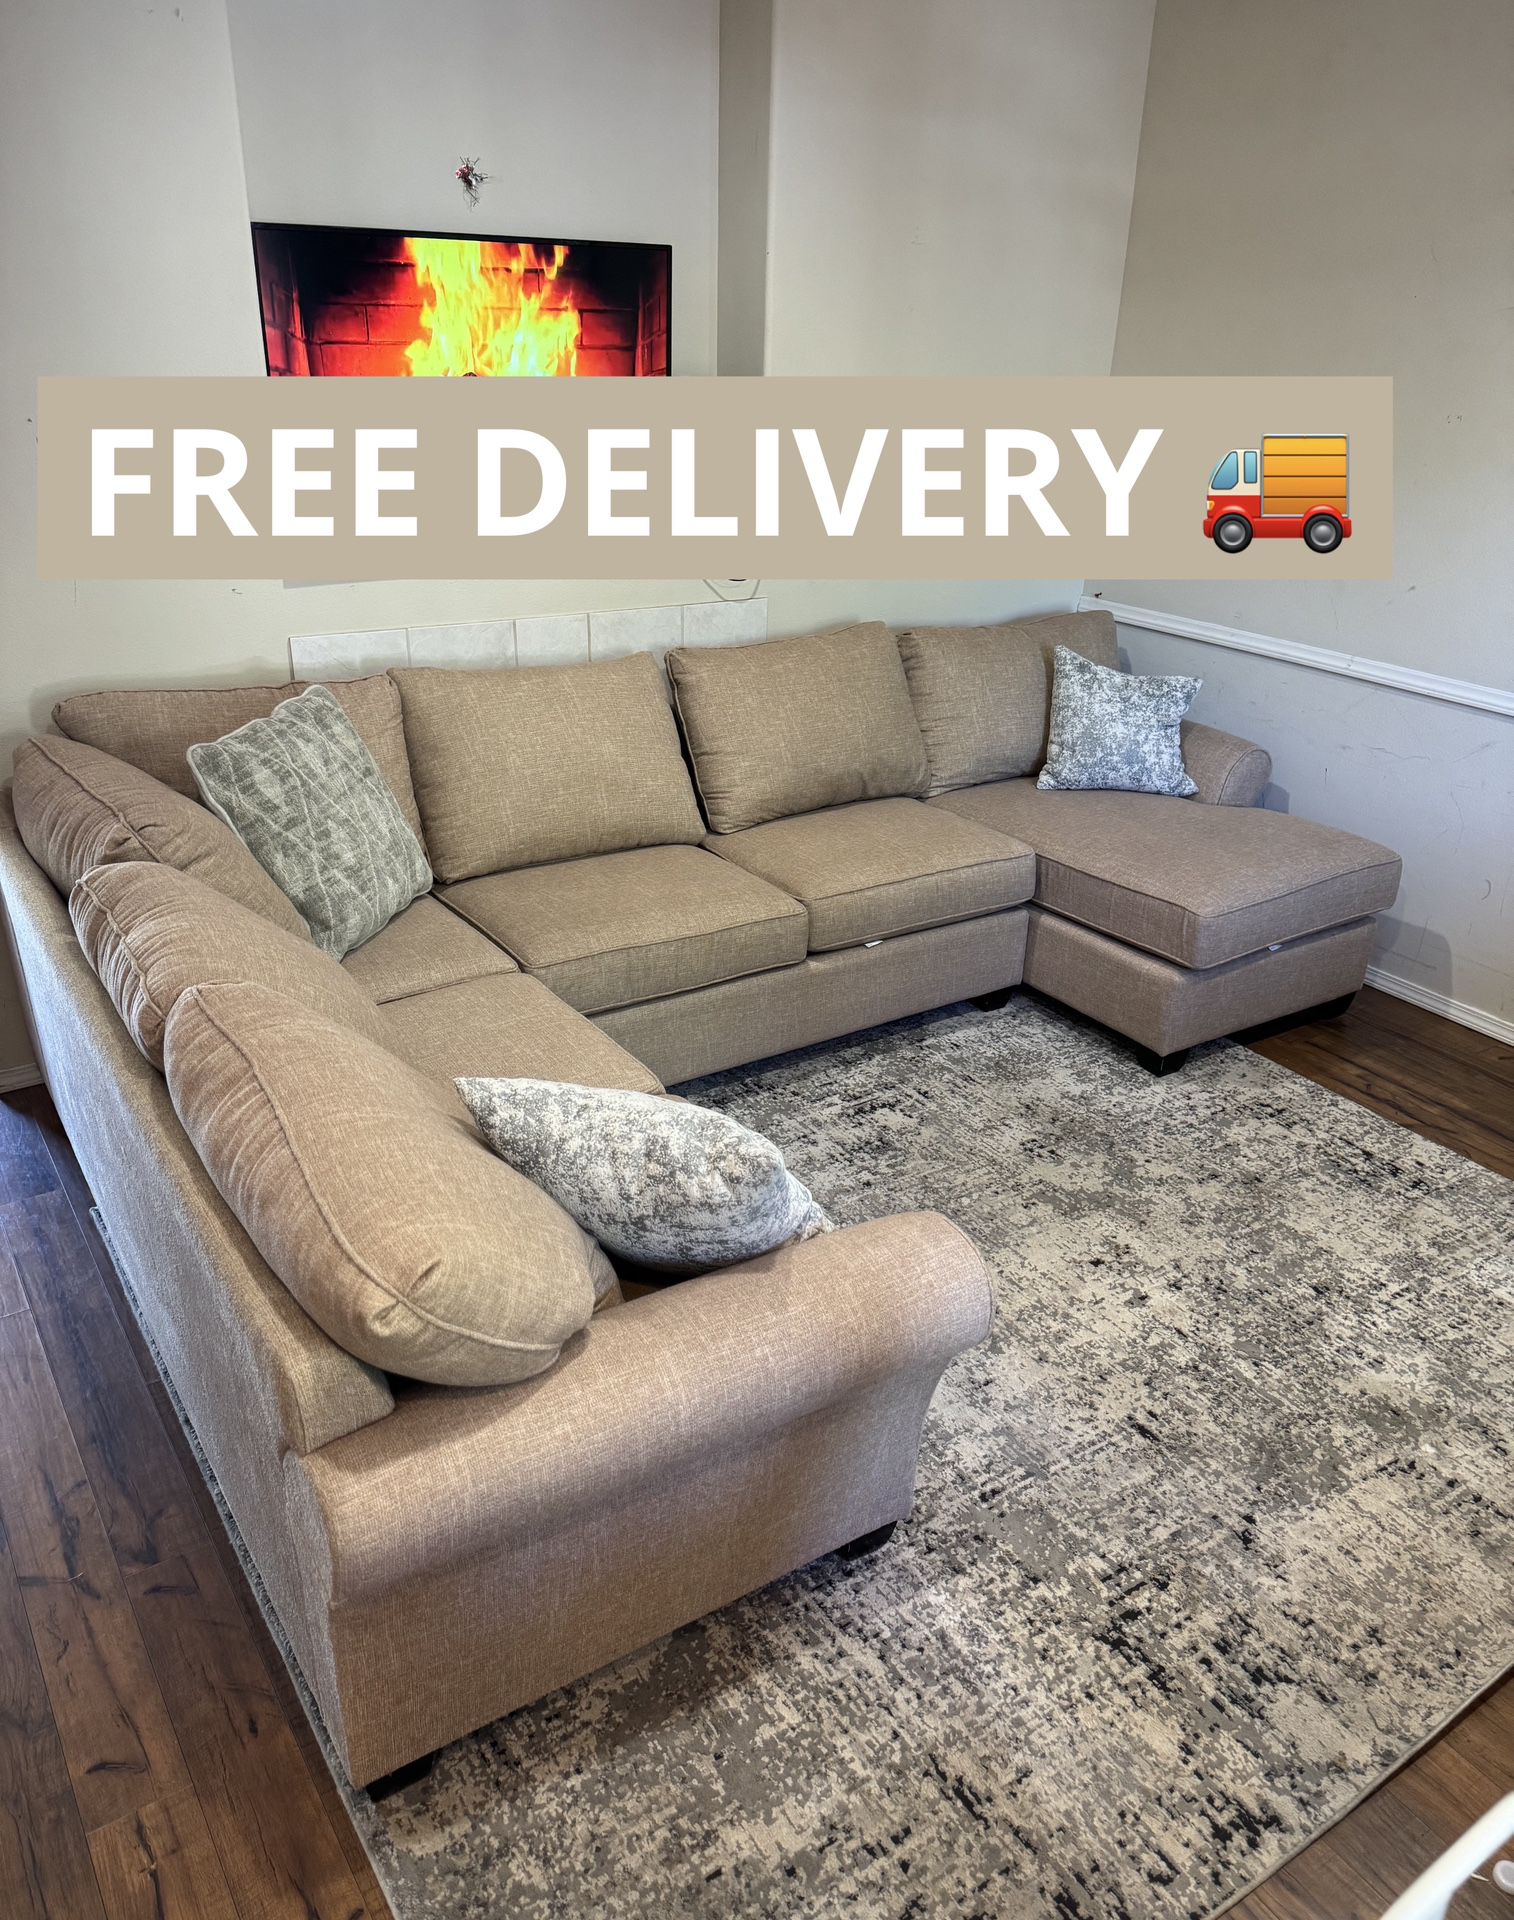 Large Stanton Sectional Couch 🛋️- FREE DELIVERY 🚚 